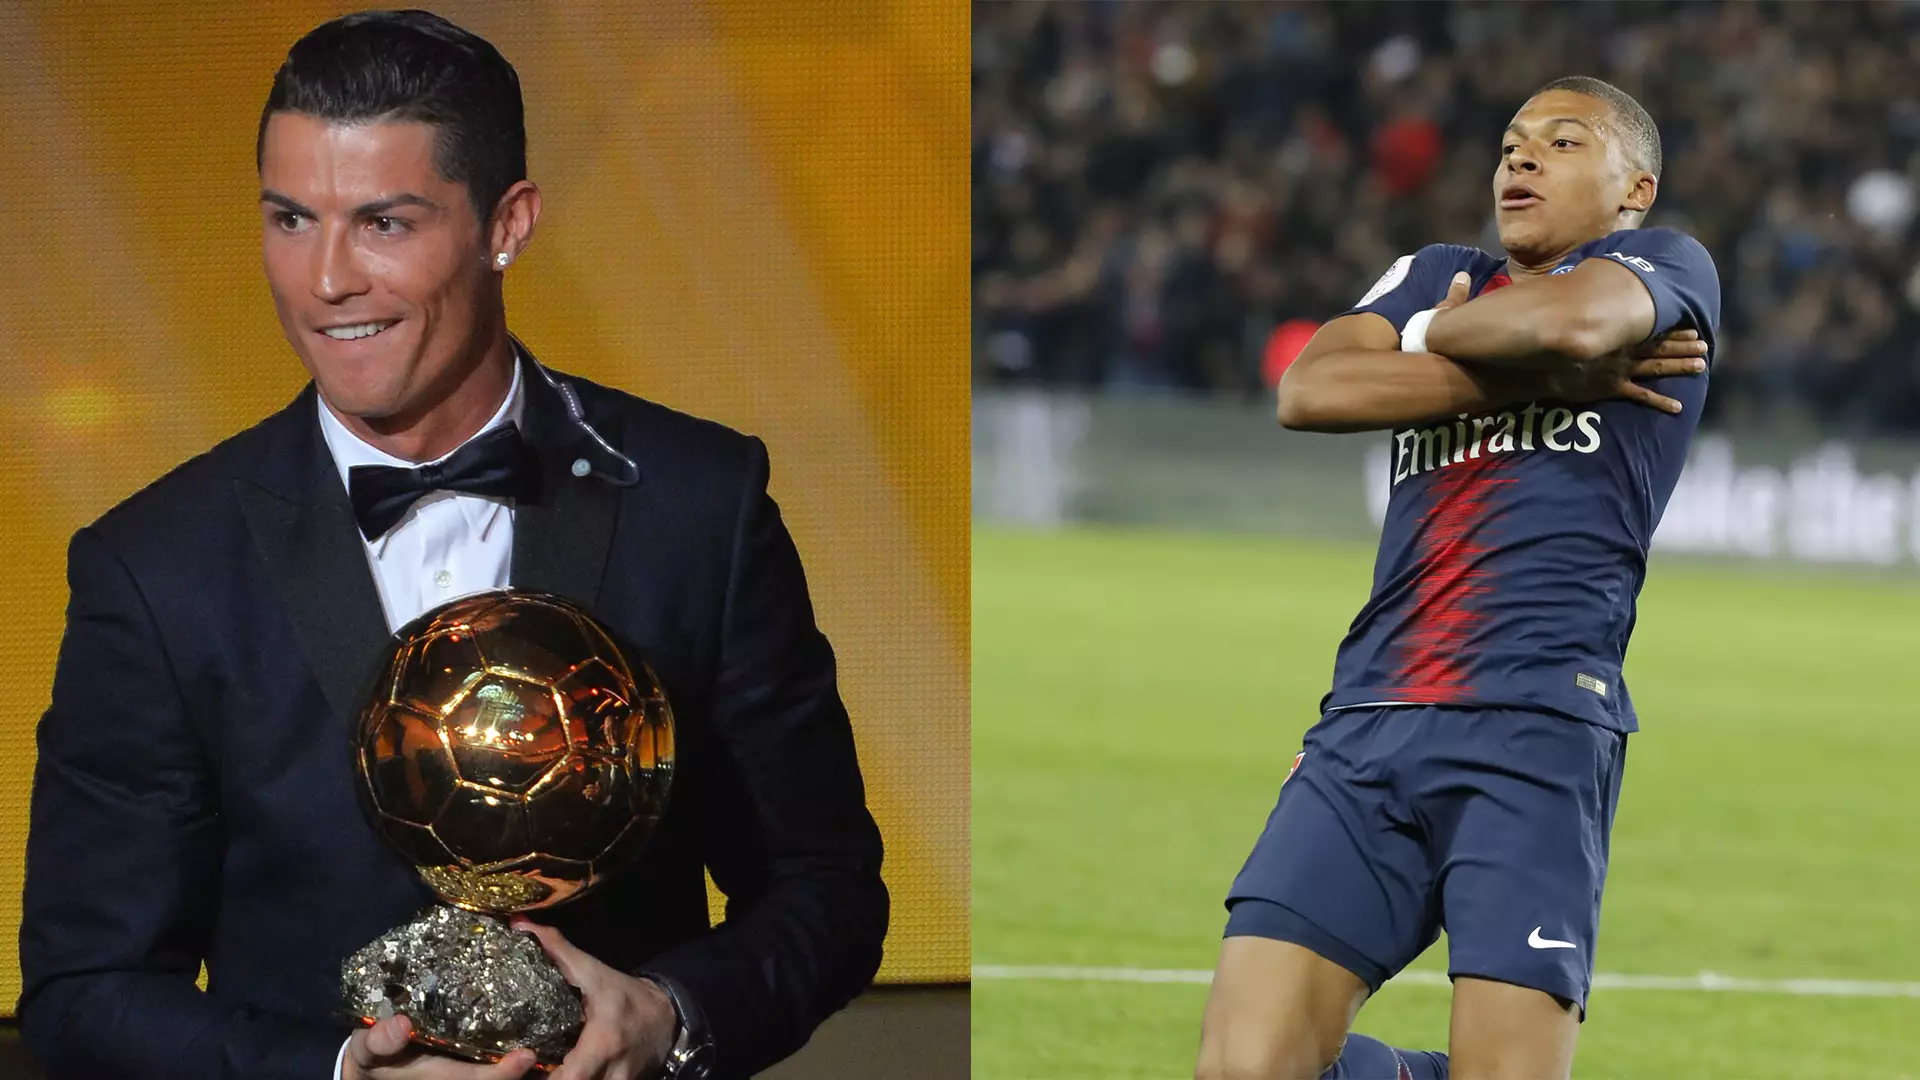 10 most likely names to win 2018 Ballon d'Or